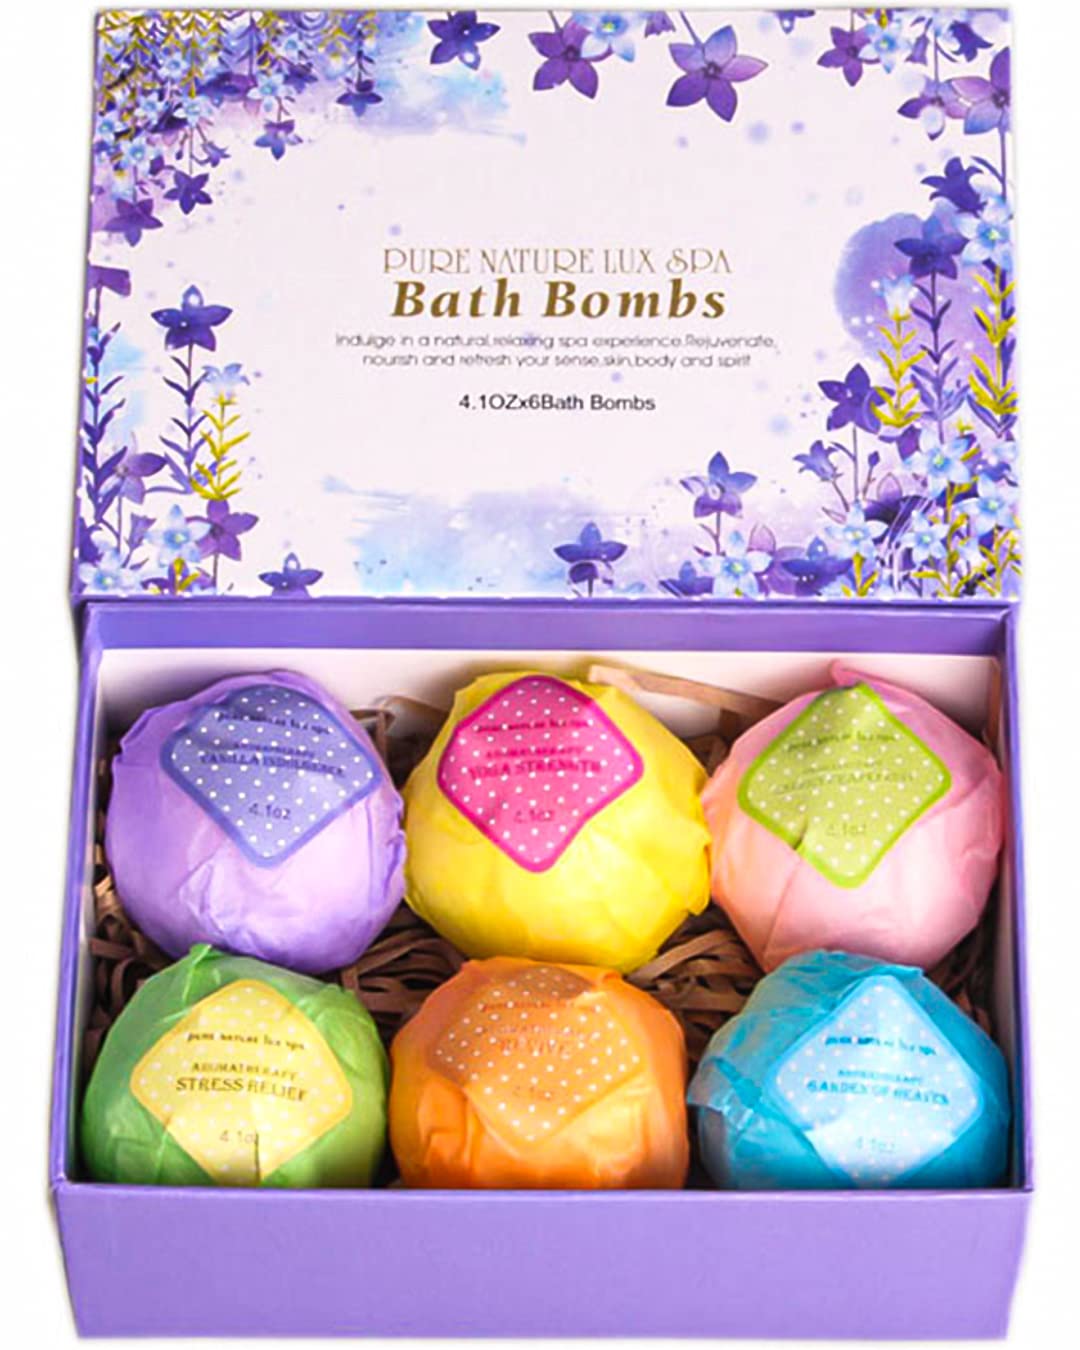 Aromatherapy Shower Steamers and Bath Bombs Gift Set - Stress Relief and Relaxation Spa Gifts for Women and Mom Who Has Everything - Relaxing Tablets with Eucalyptus, Lavender for Relaxation.